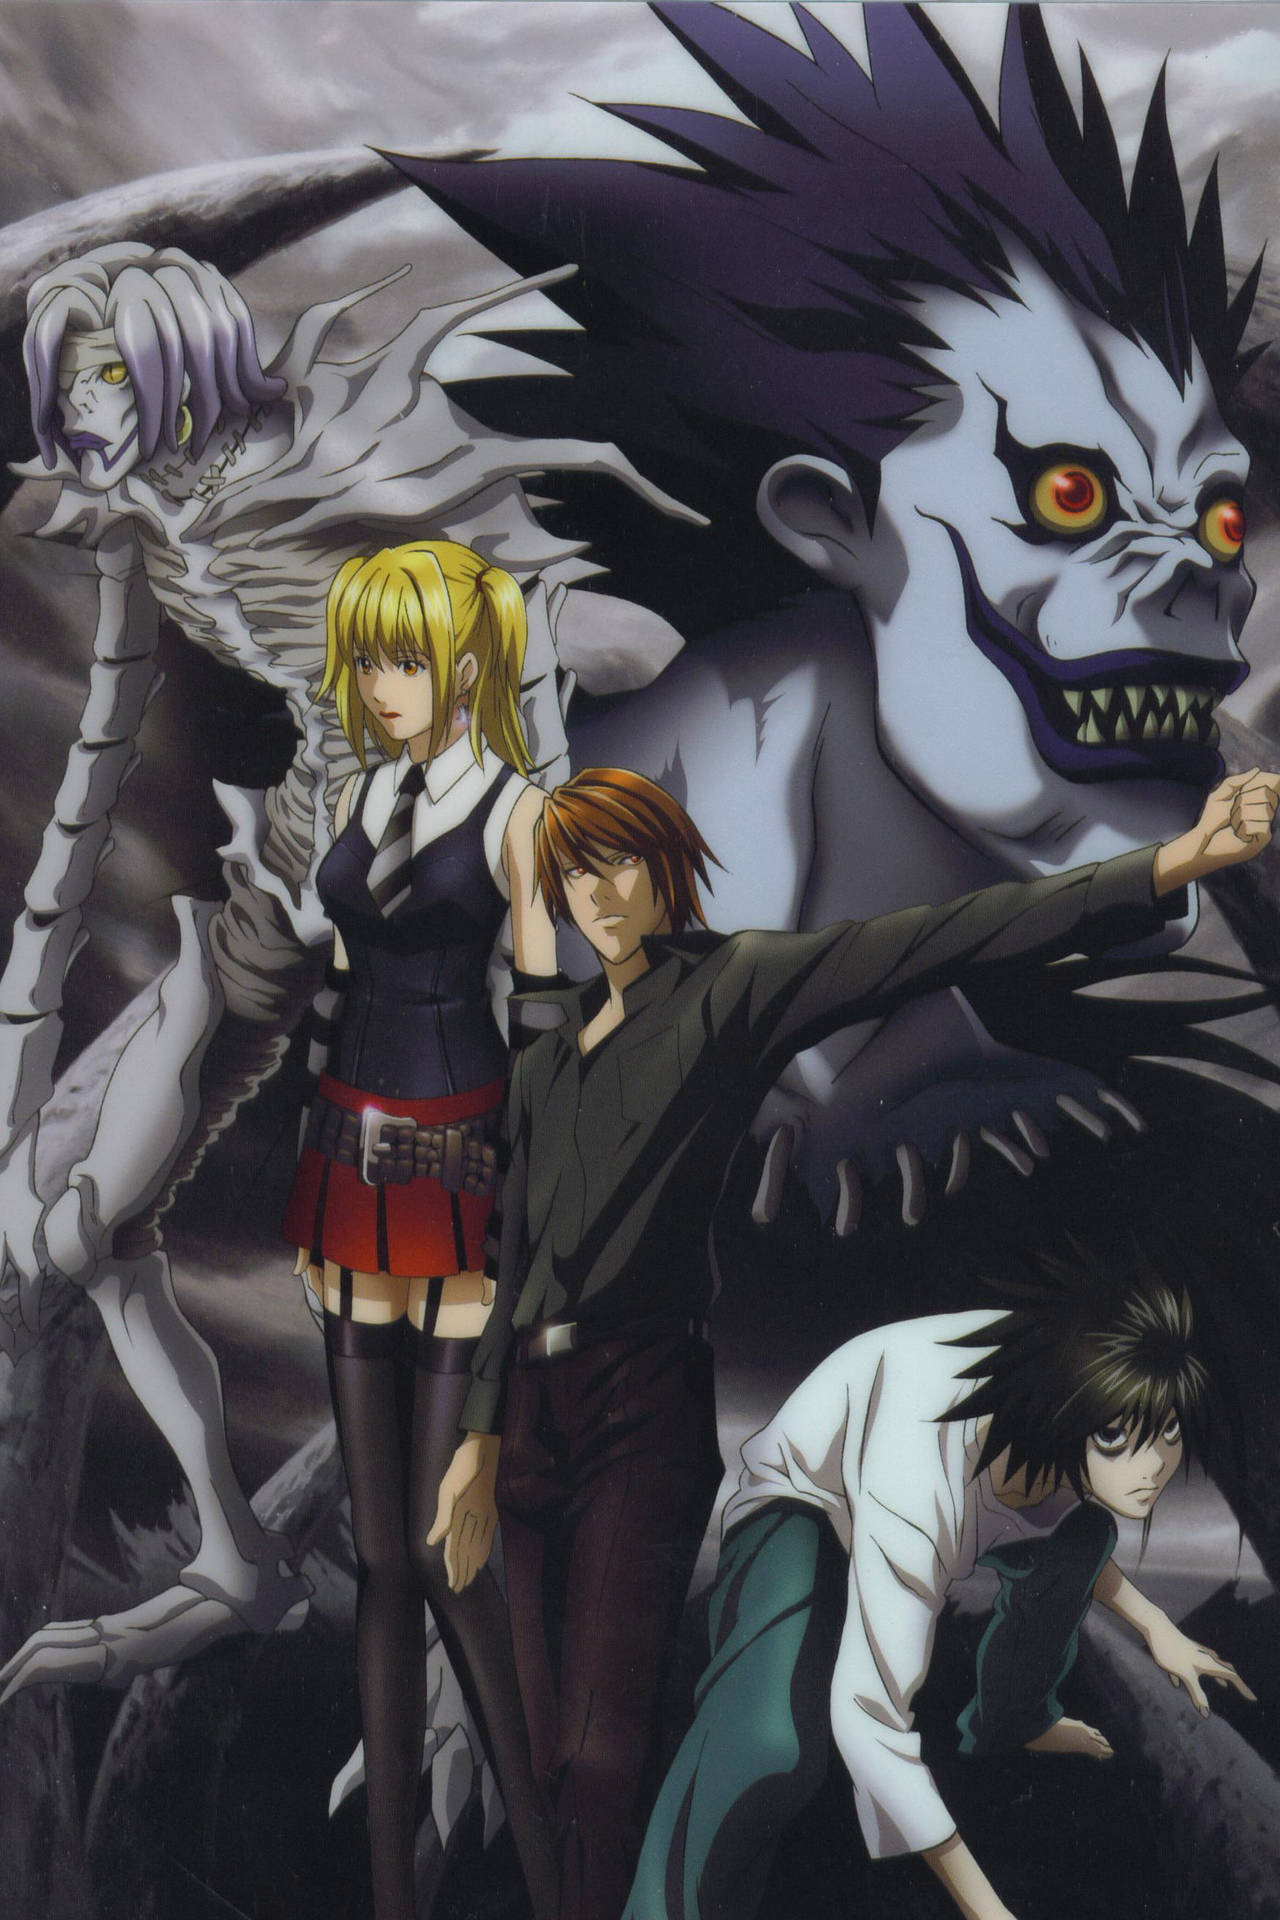 Death Note is a Japanese manga series written and illustrated by Tsugumi Ohba and Takeshi Obata. - Death Note